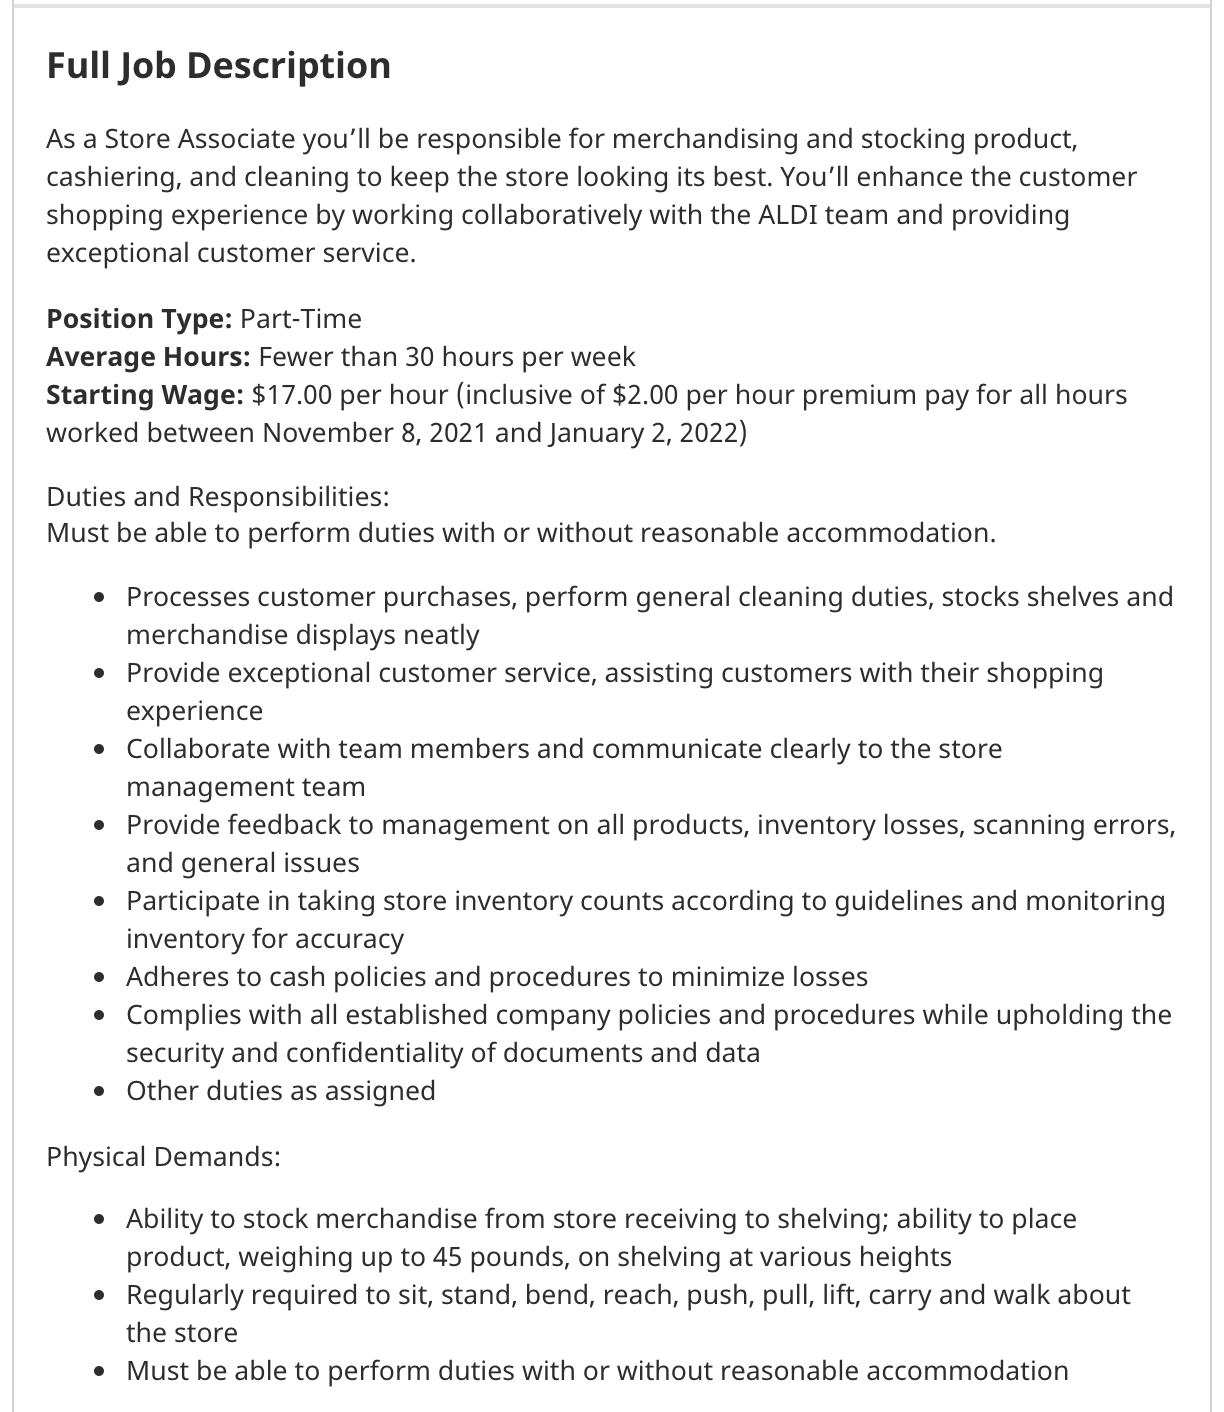 A job posting for a store associate at Aldi. This page lists duties, responsibilities, and physical demands. 